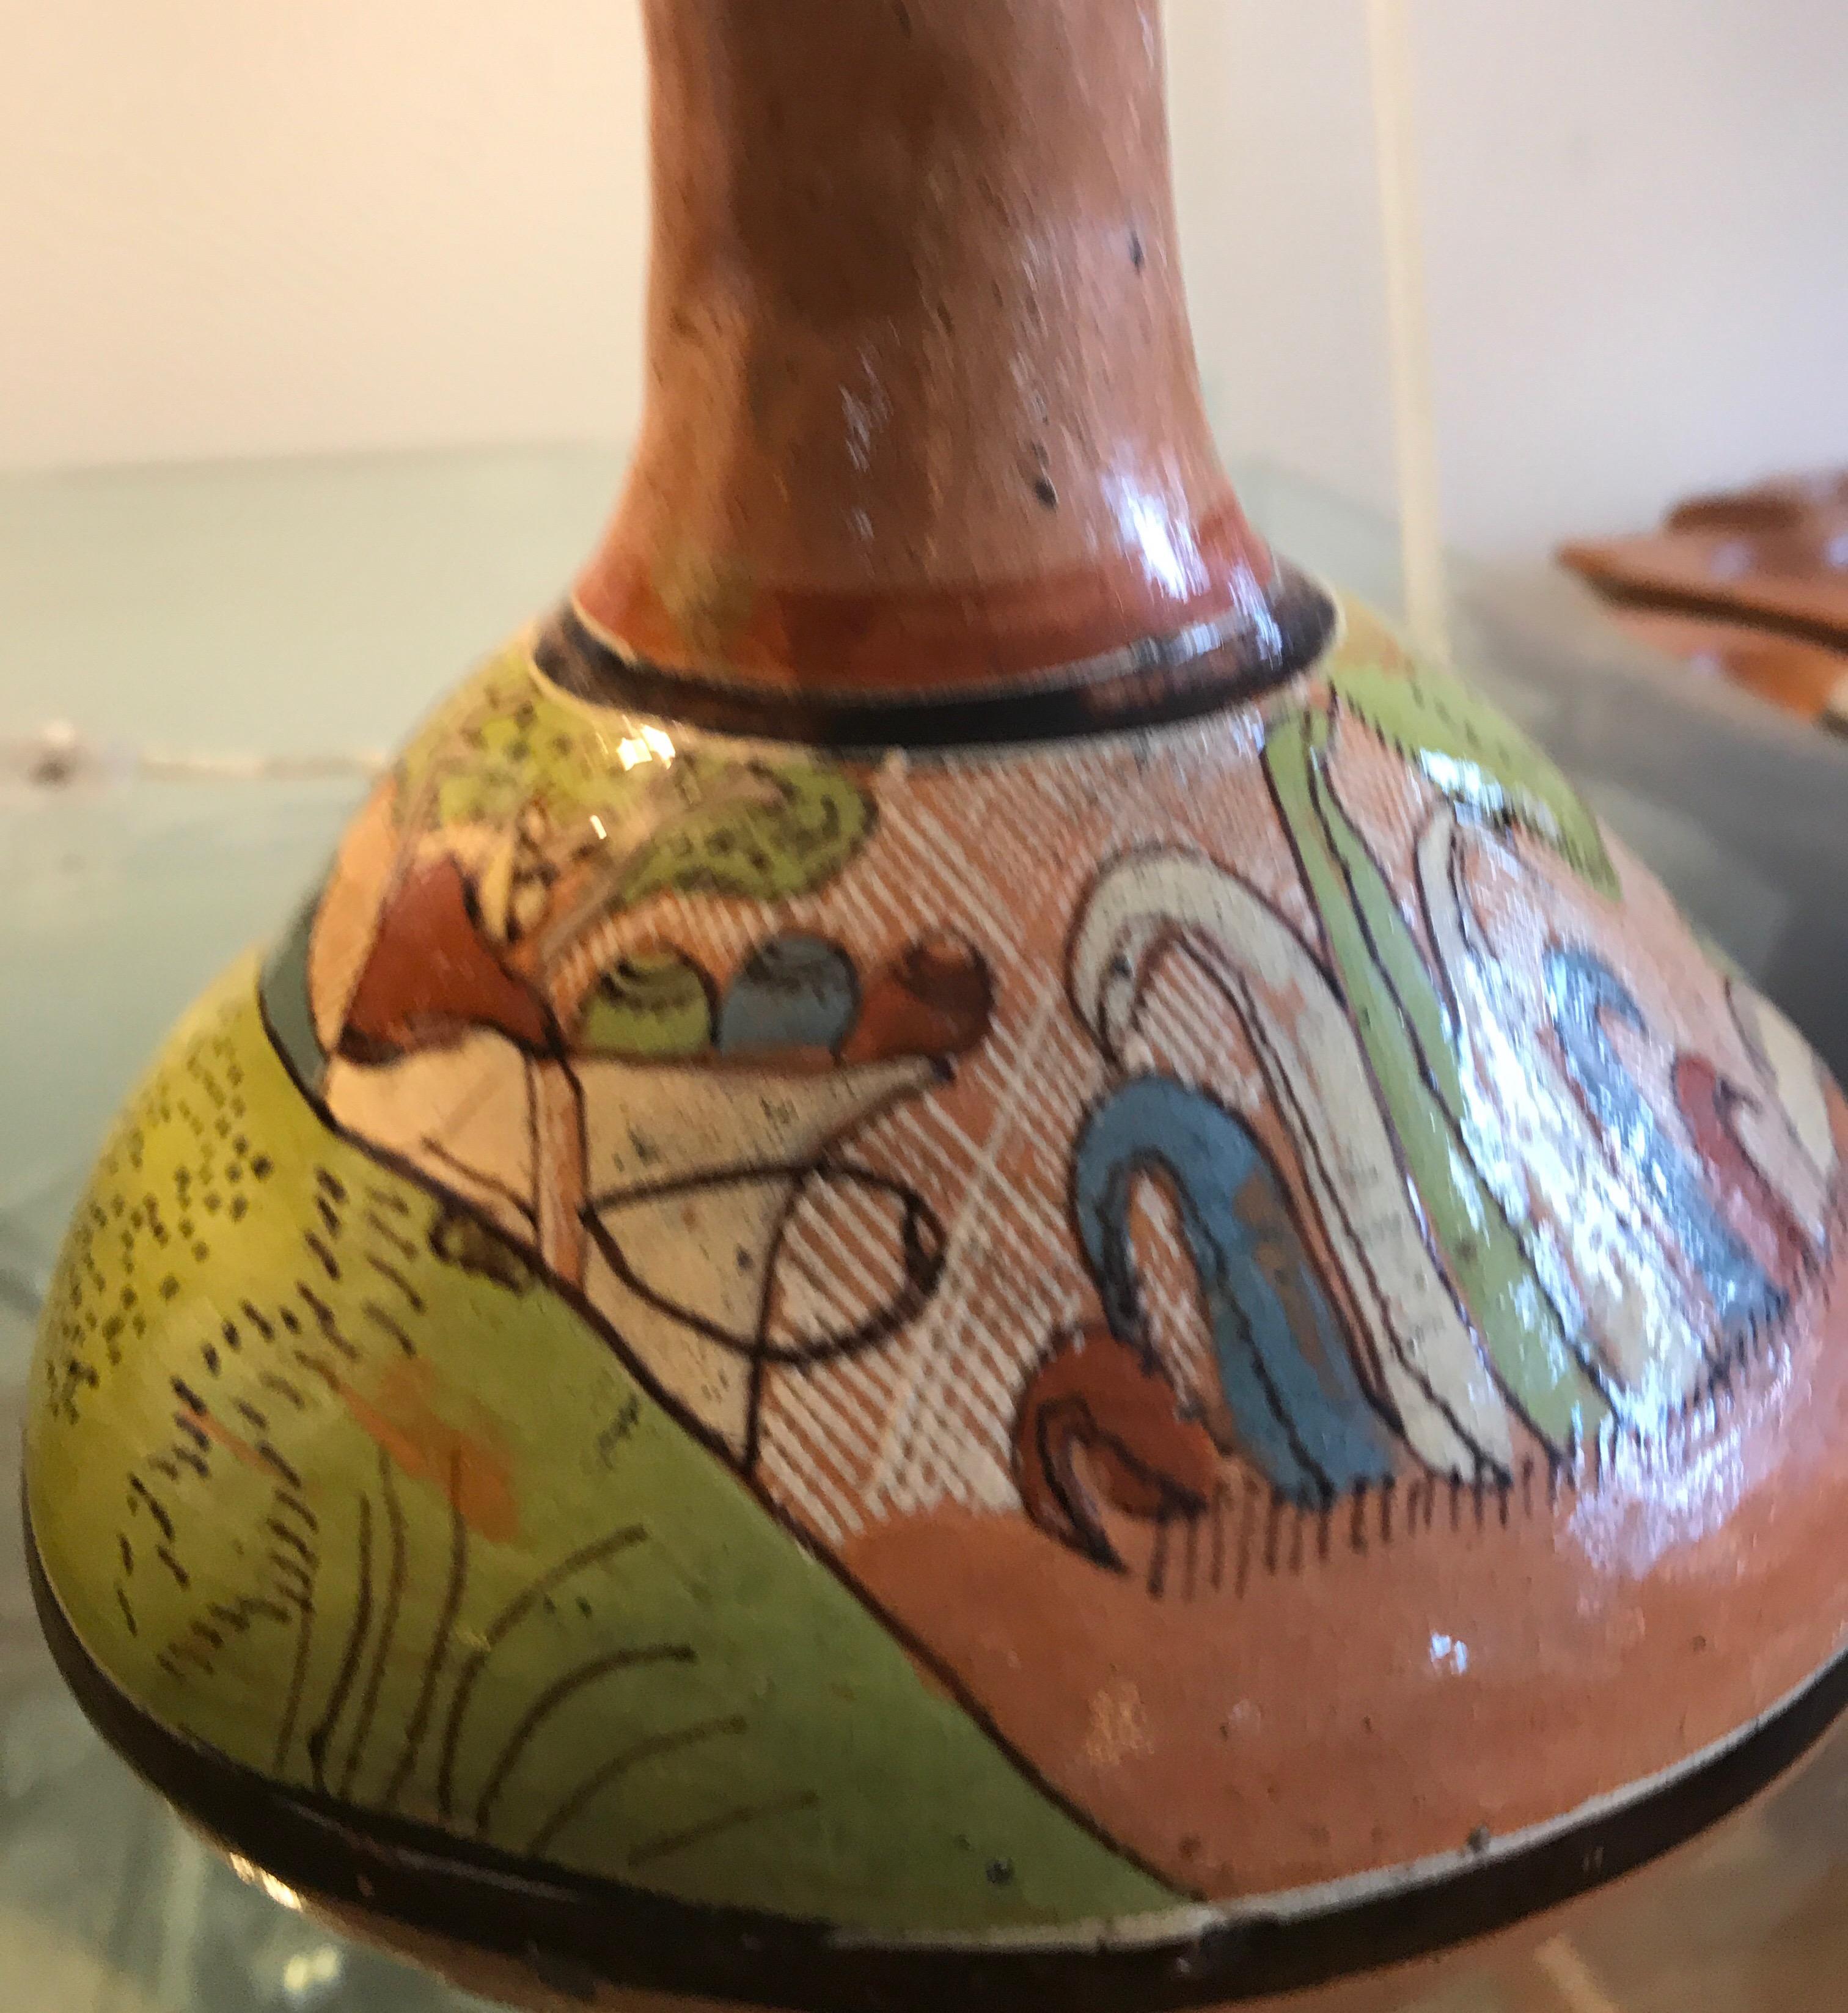 Mexican hand painted Tlaquepaque ceramic vase. The vessel is hand decorated with cacti, aloe, and the Mexican landscape.